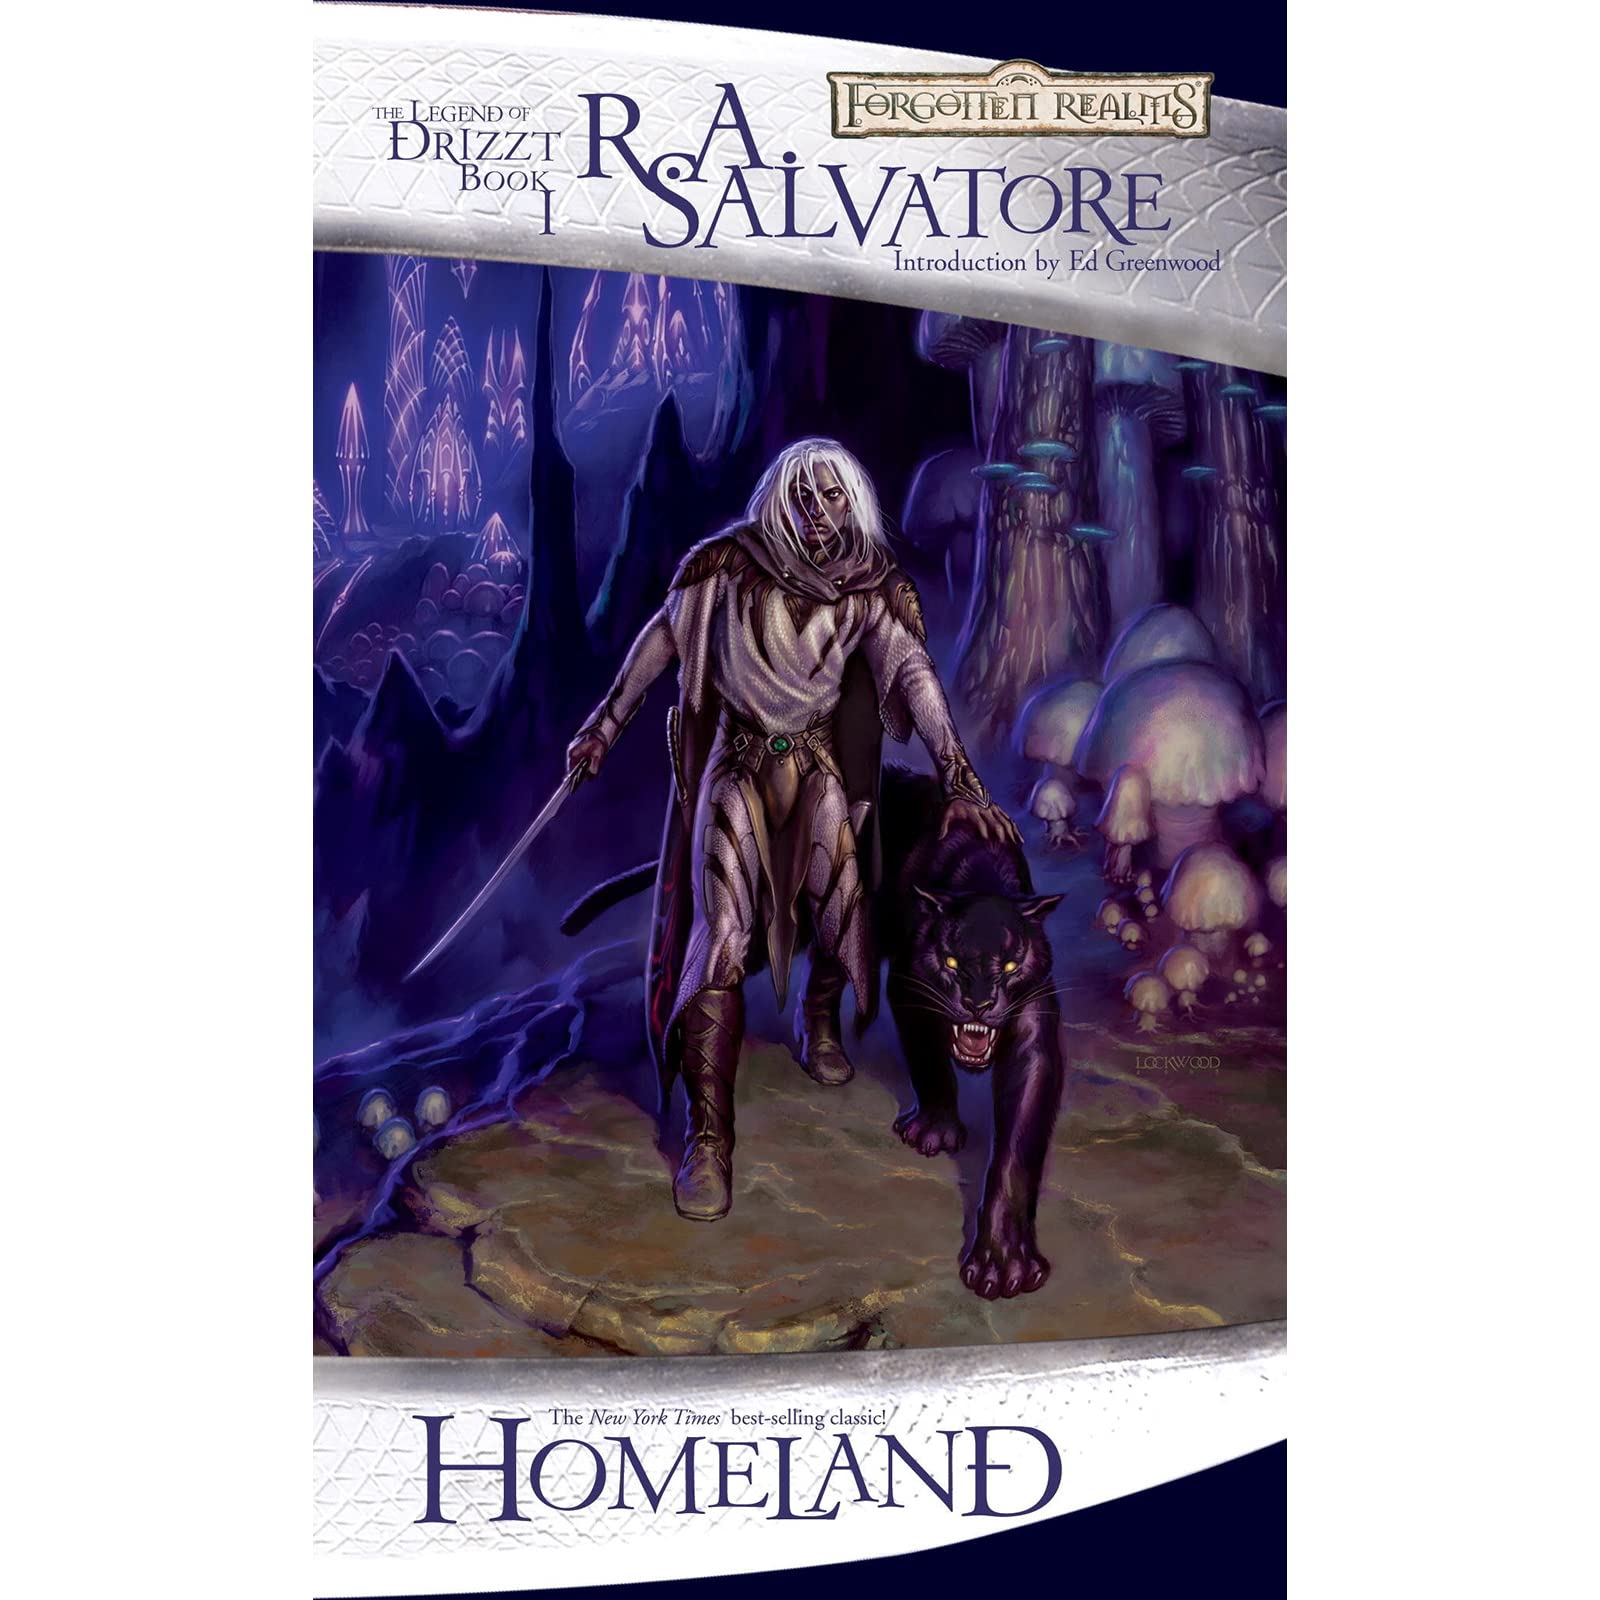 Todd Lockwood's cover to the 2004 re-release. (Image: Wizards of the Coast)